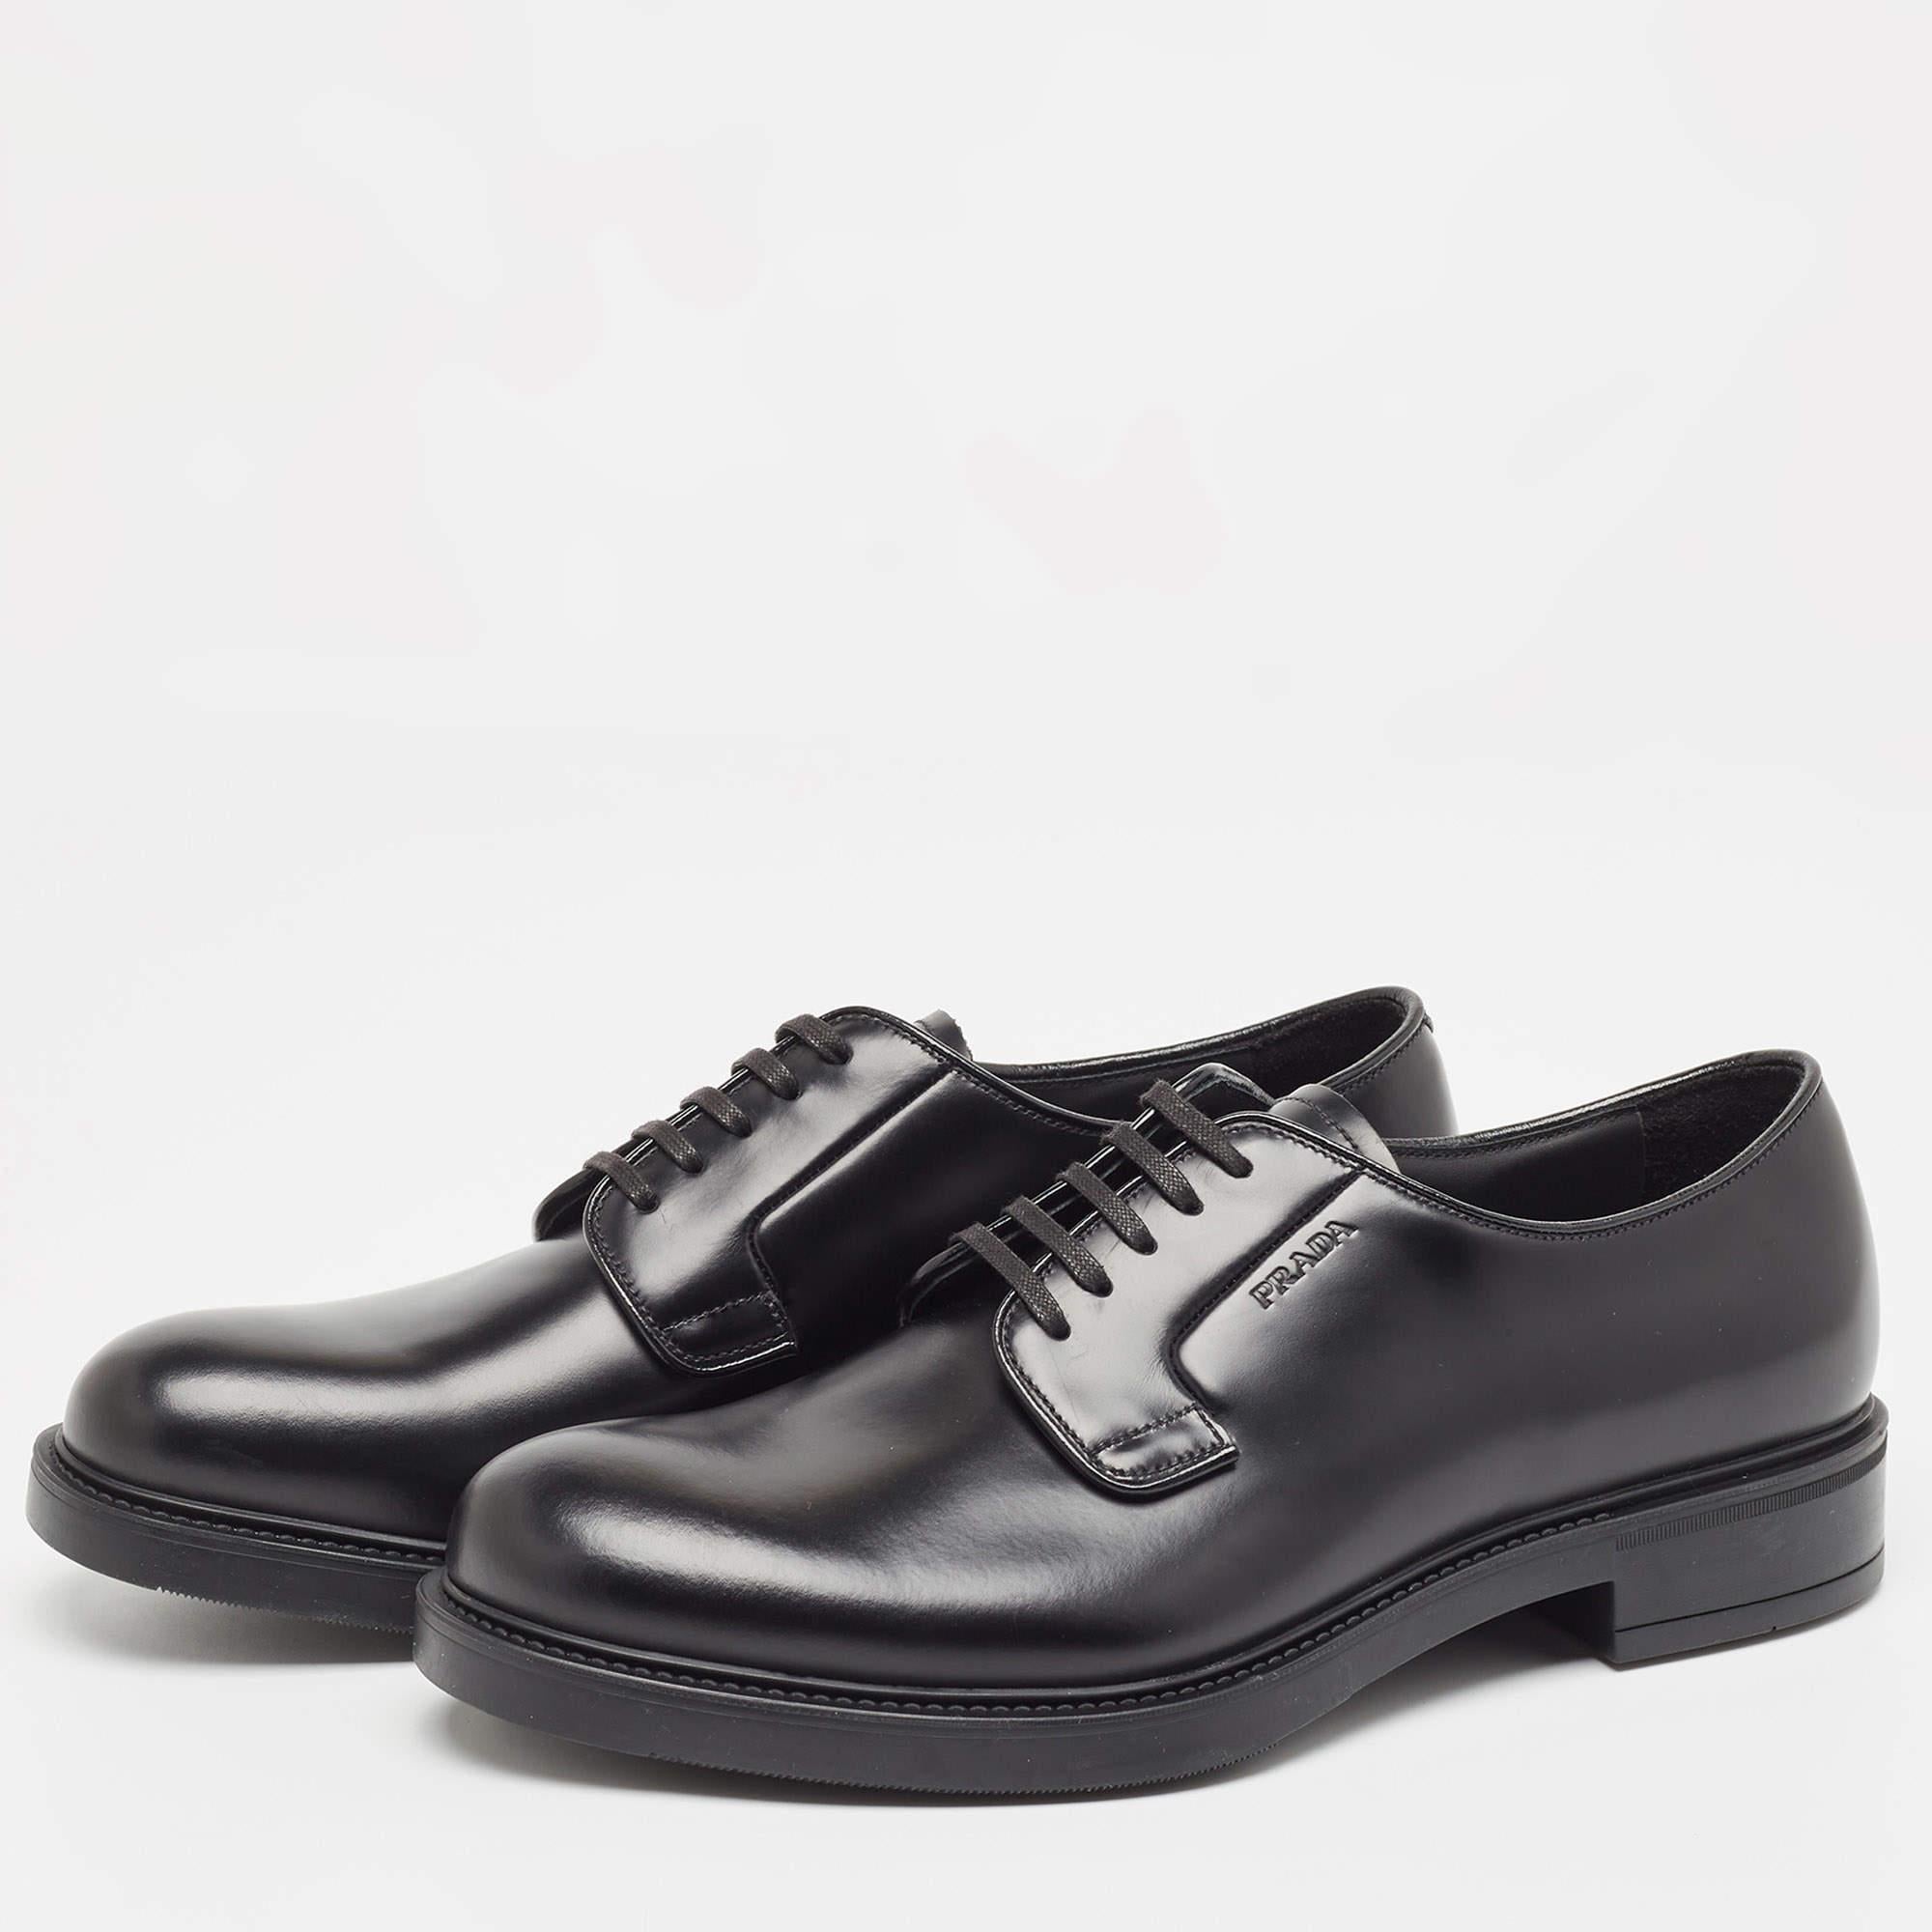 Prada Black Leather Lace Up Oxfords Size 40 For Sale 4